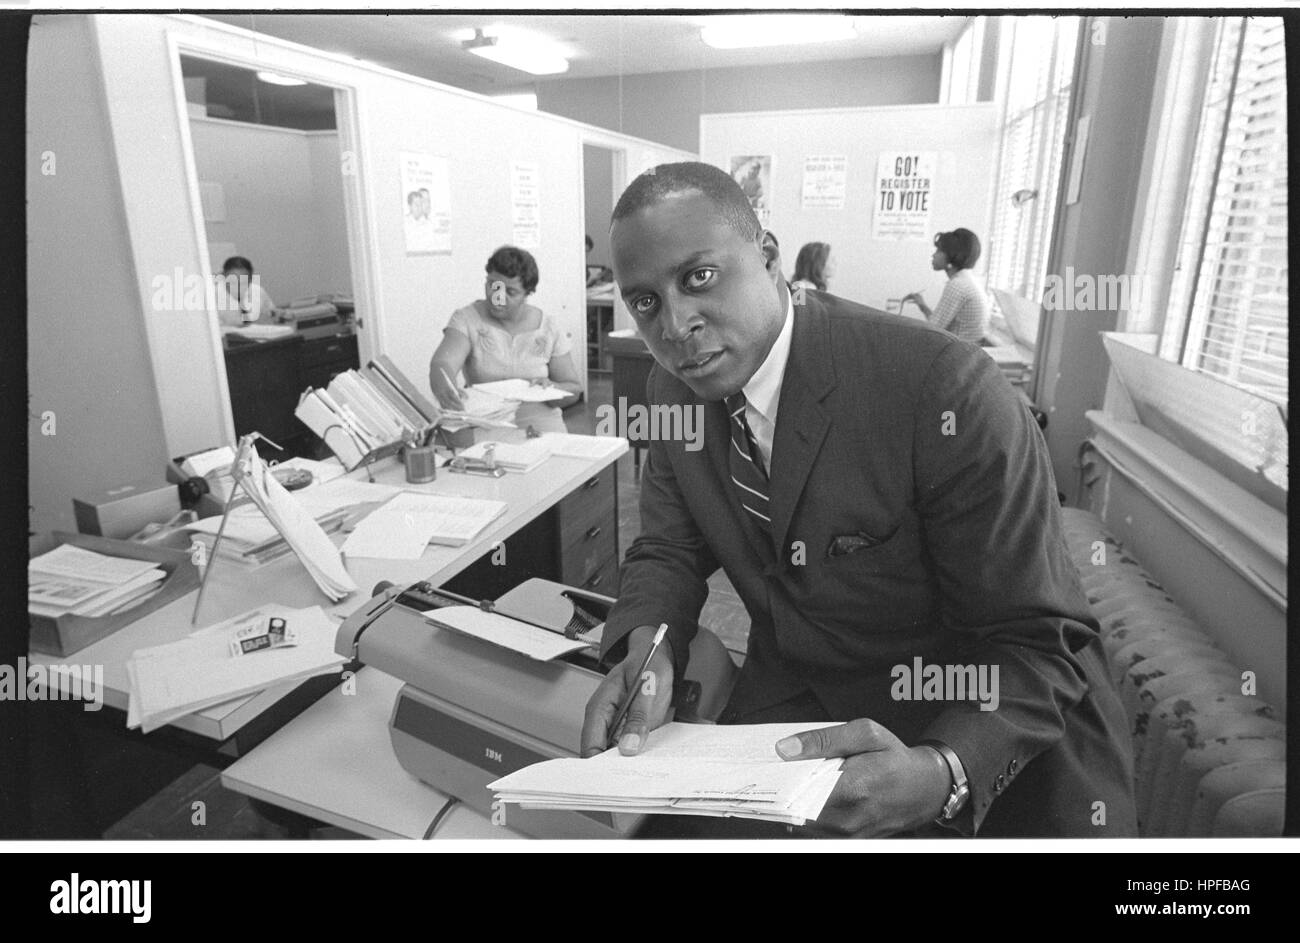 Vernon E Jordan working on a voter education project at the Southern Regional Council, Atlanta, GA, 06/15/1967. Photo by Warren K Leffler Stock Photo